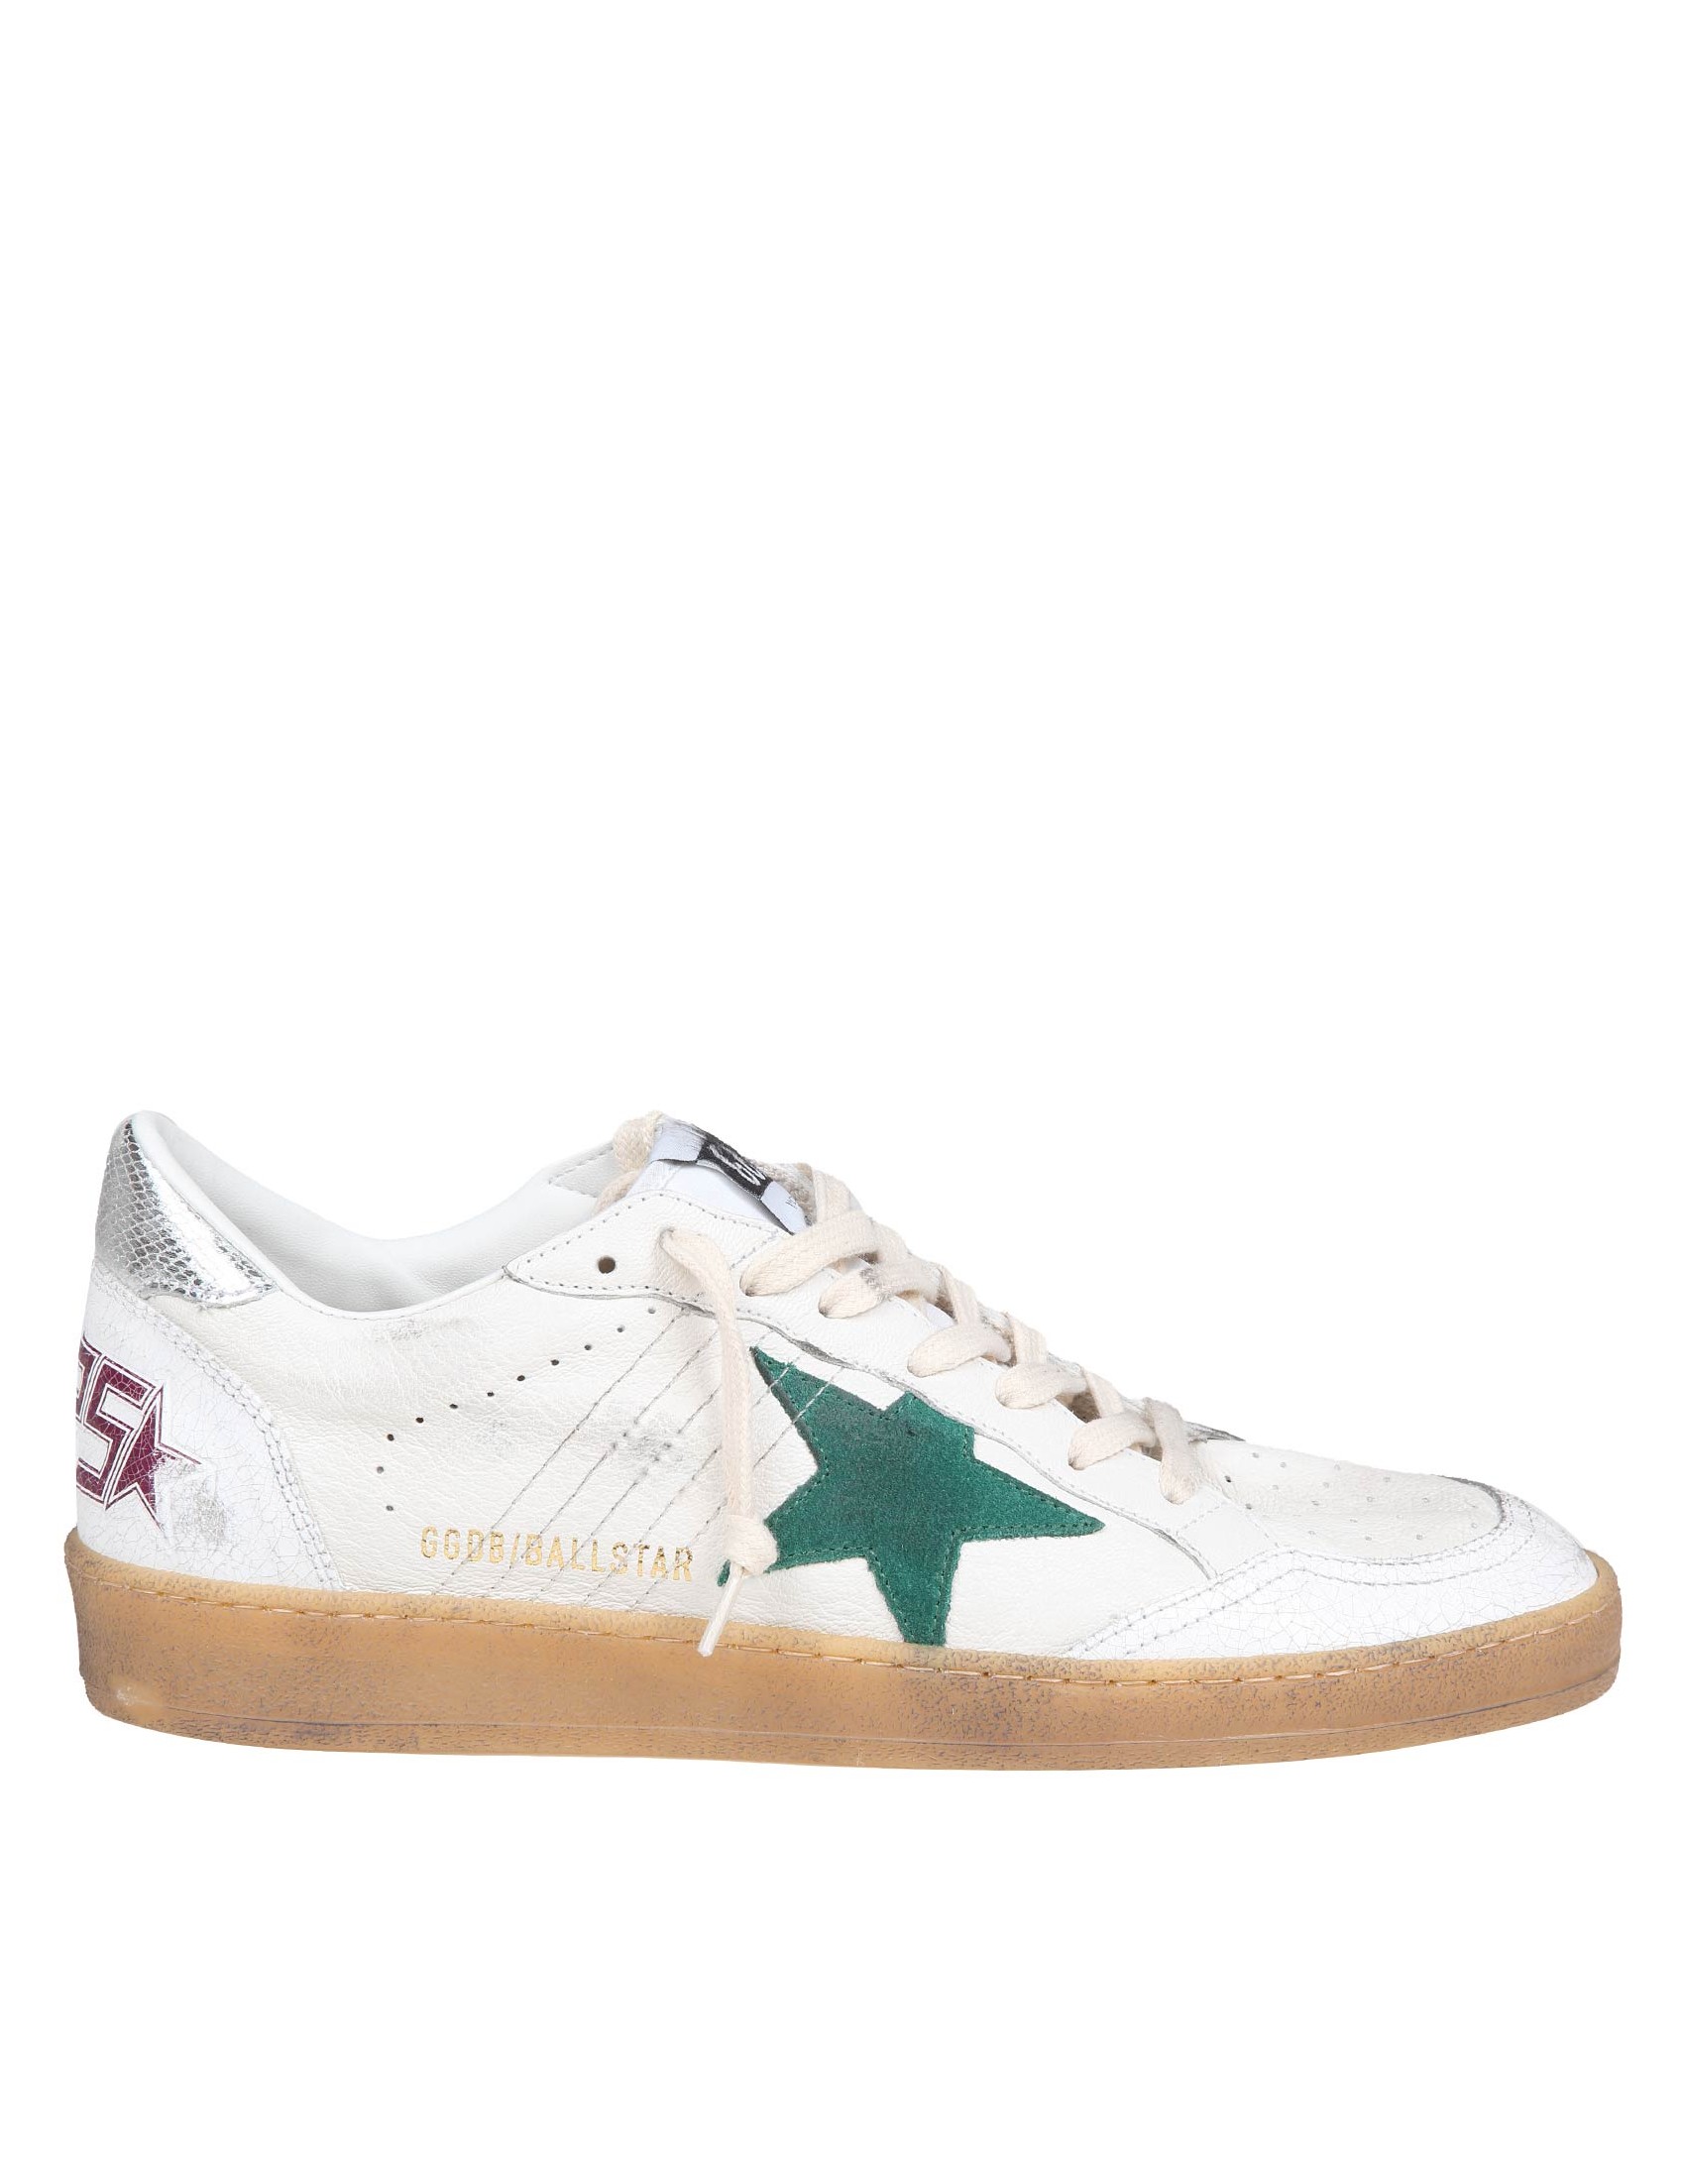 GOLDEN GOOSE BALL STAR IN WHITE AND GREEN NAPPA